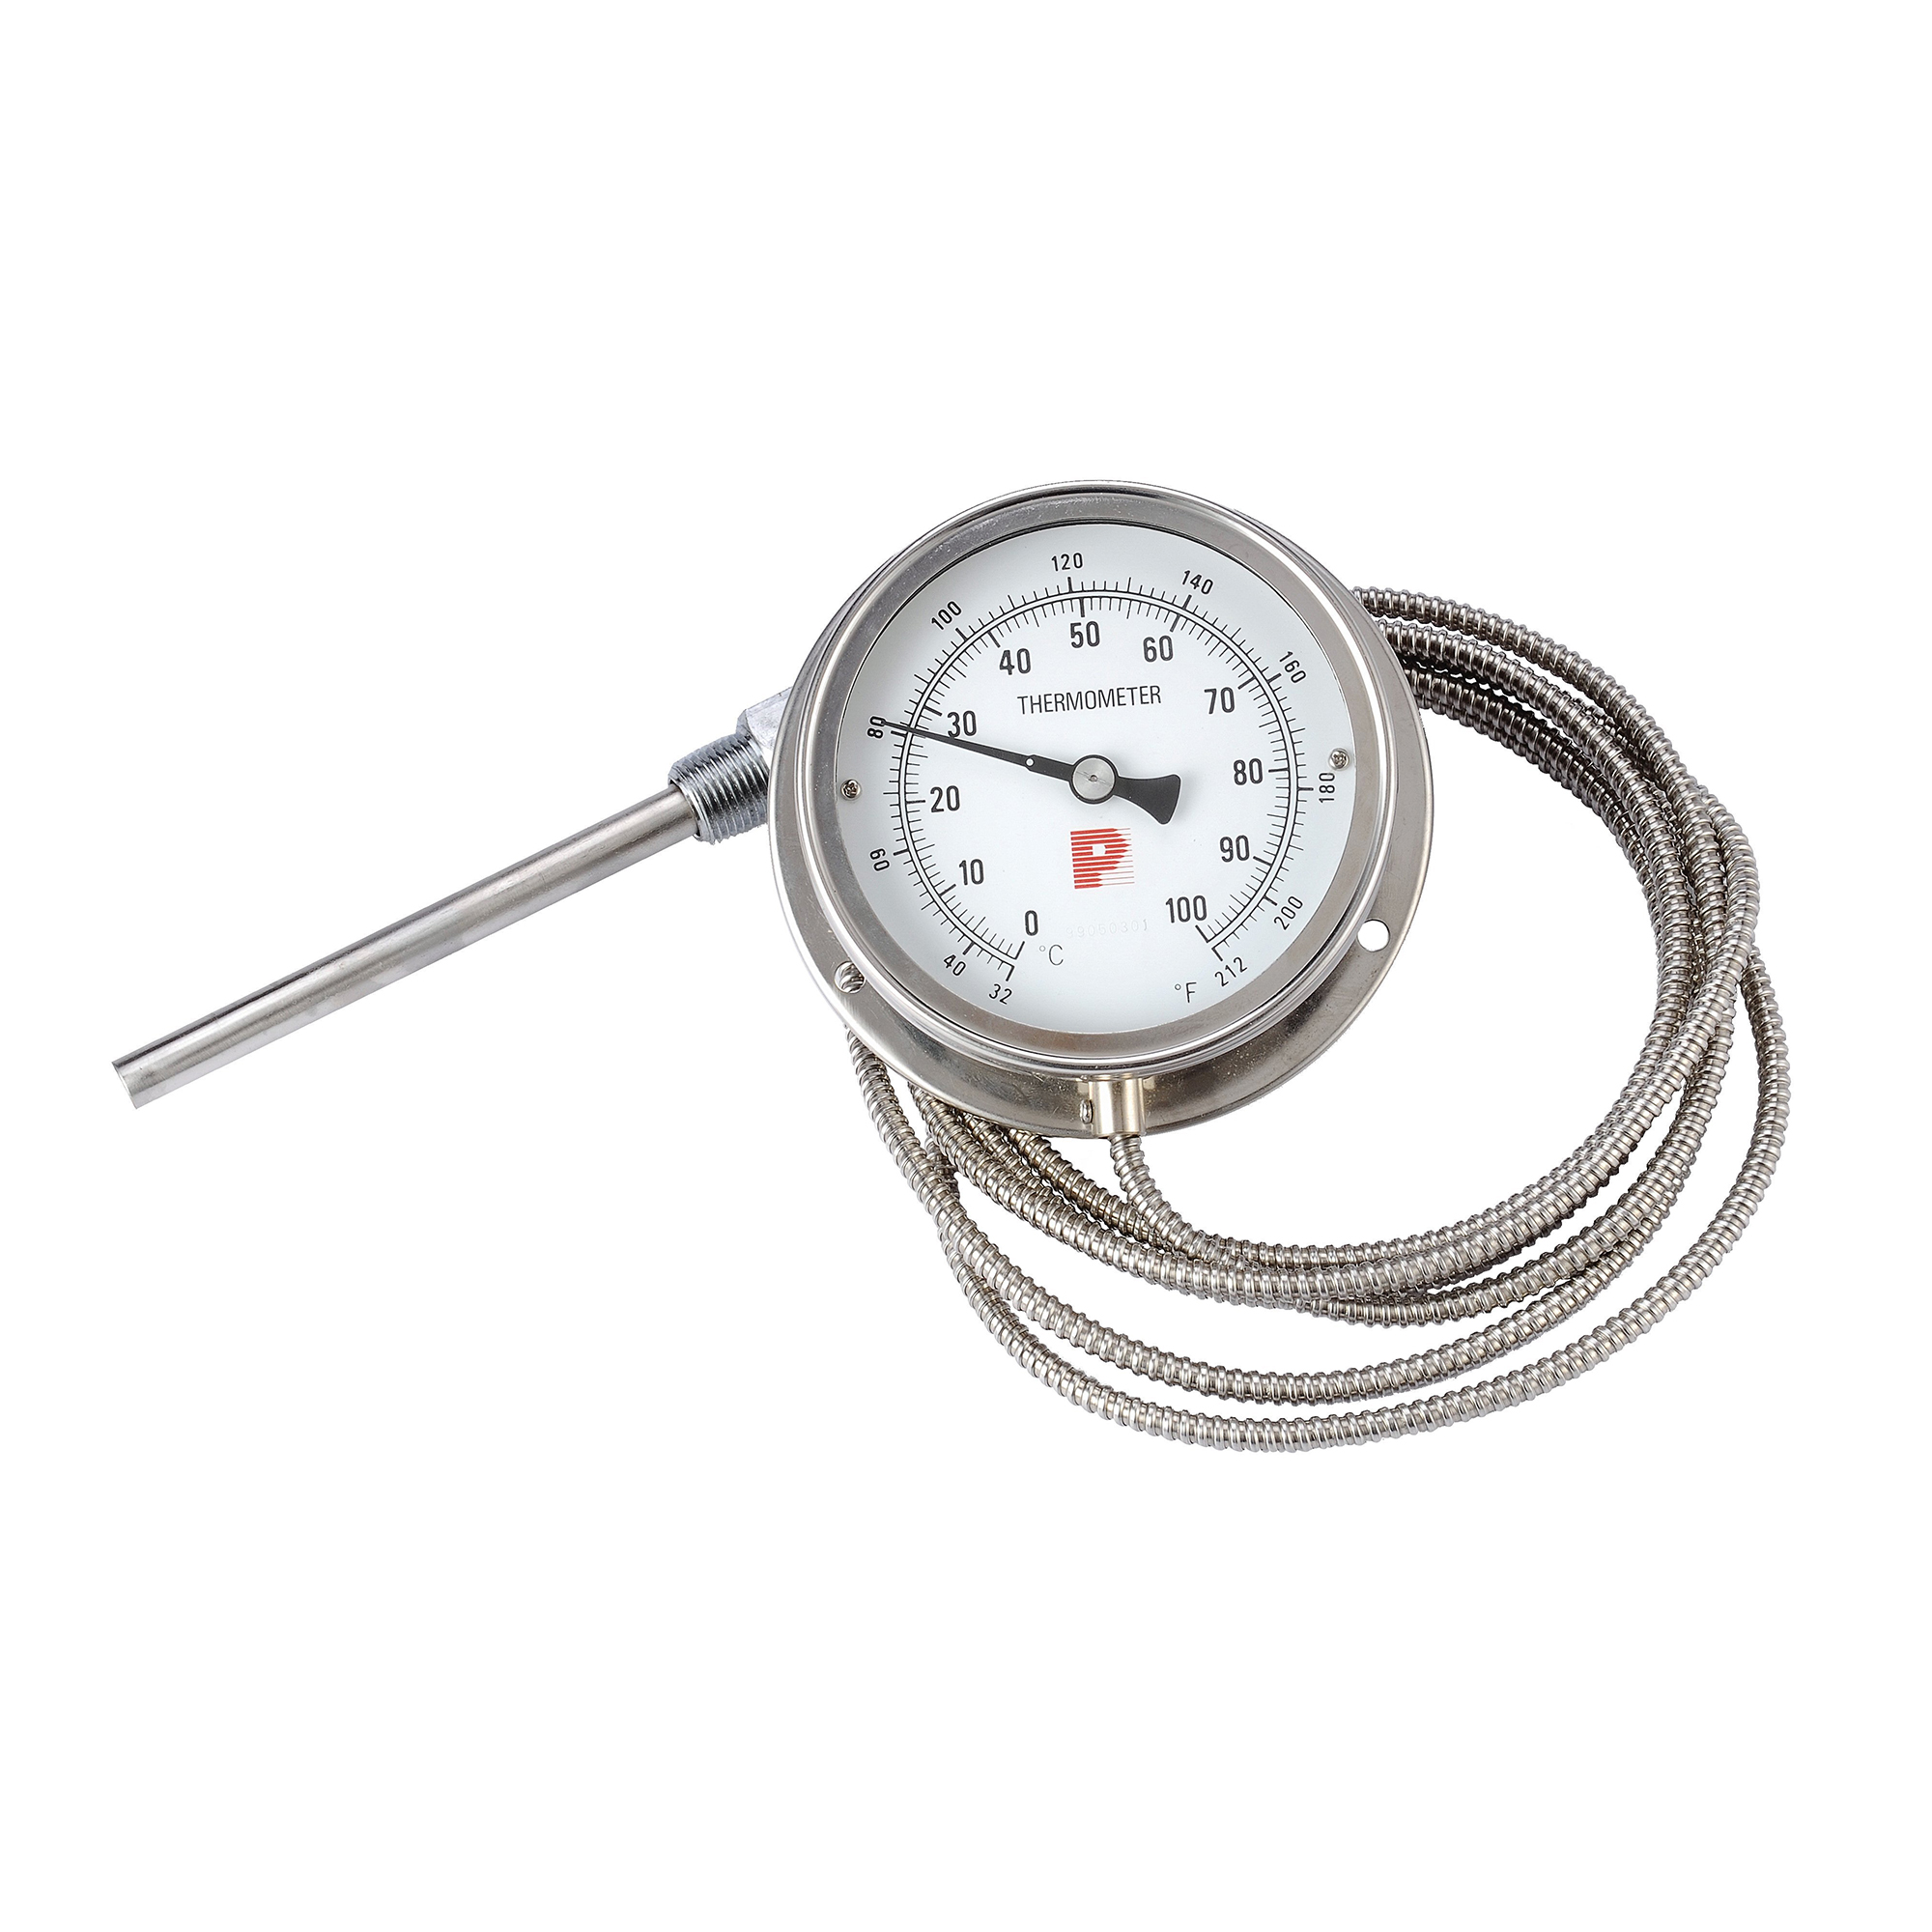 Stainless steel capillary thermometer